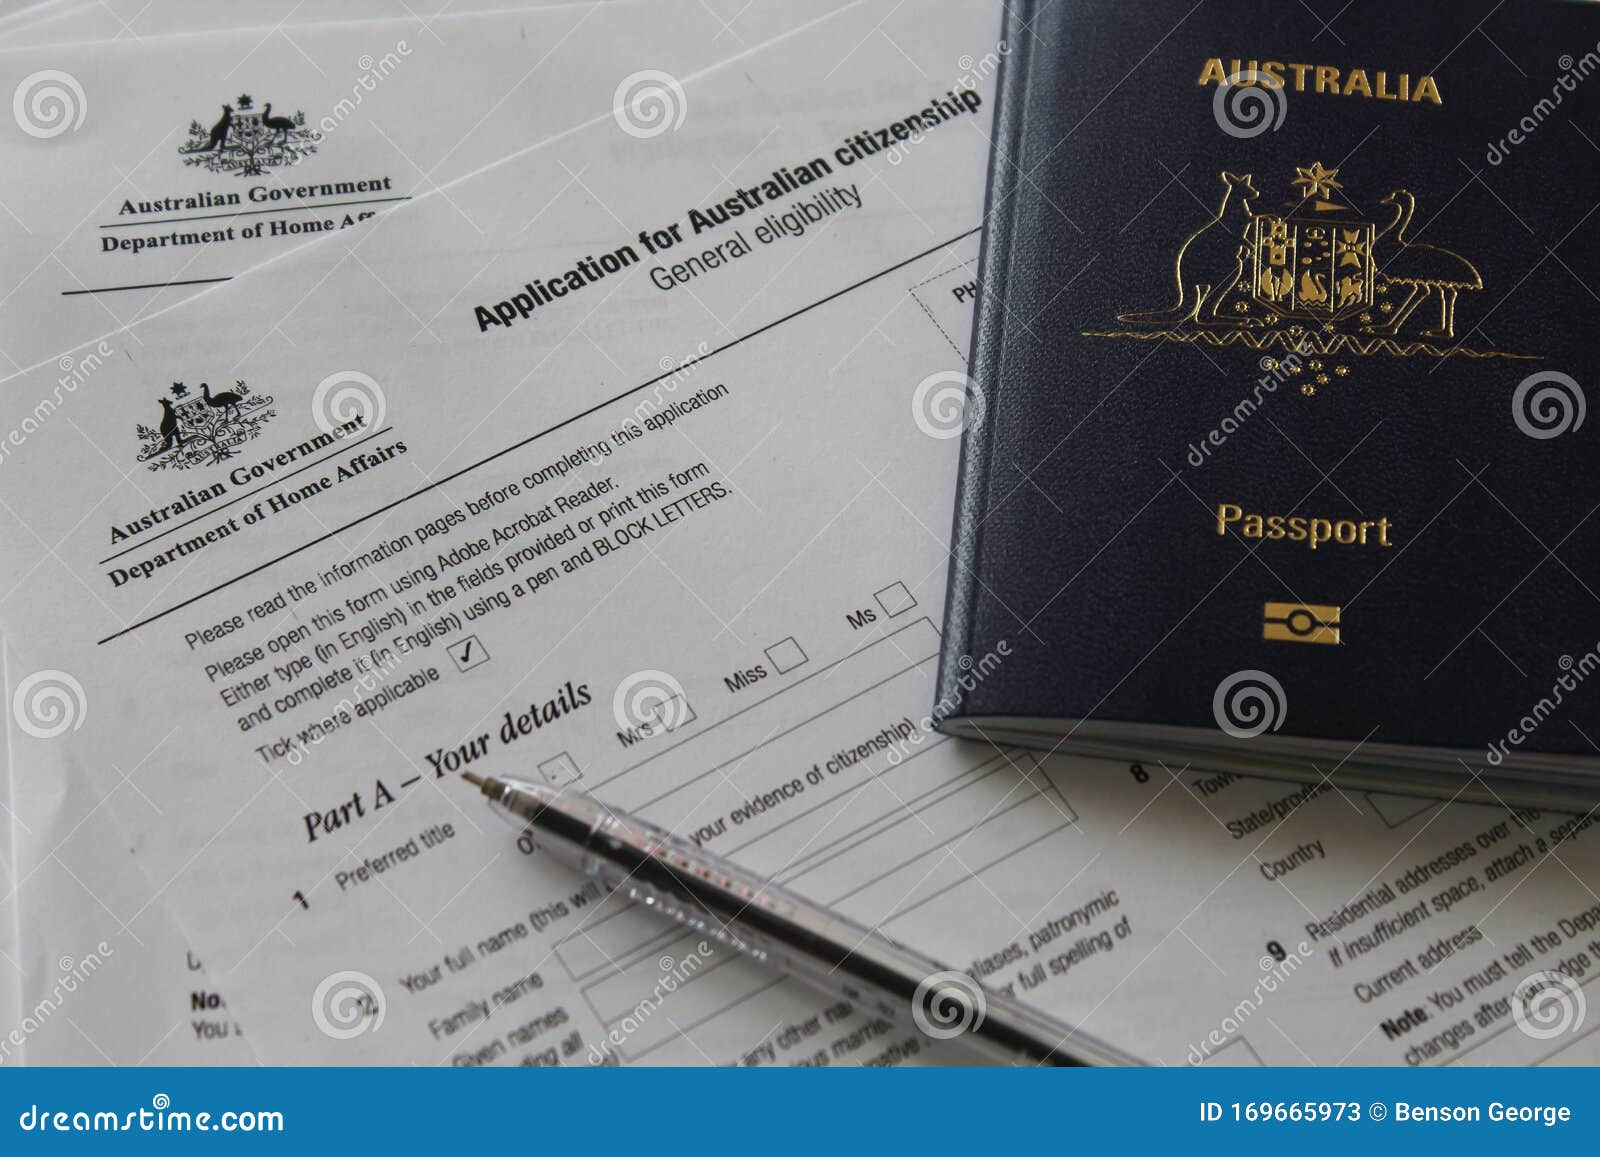 Australian Australian Passport in the Foreground Stock Image Image of emigration, ability: 169665973